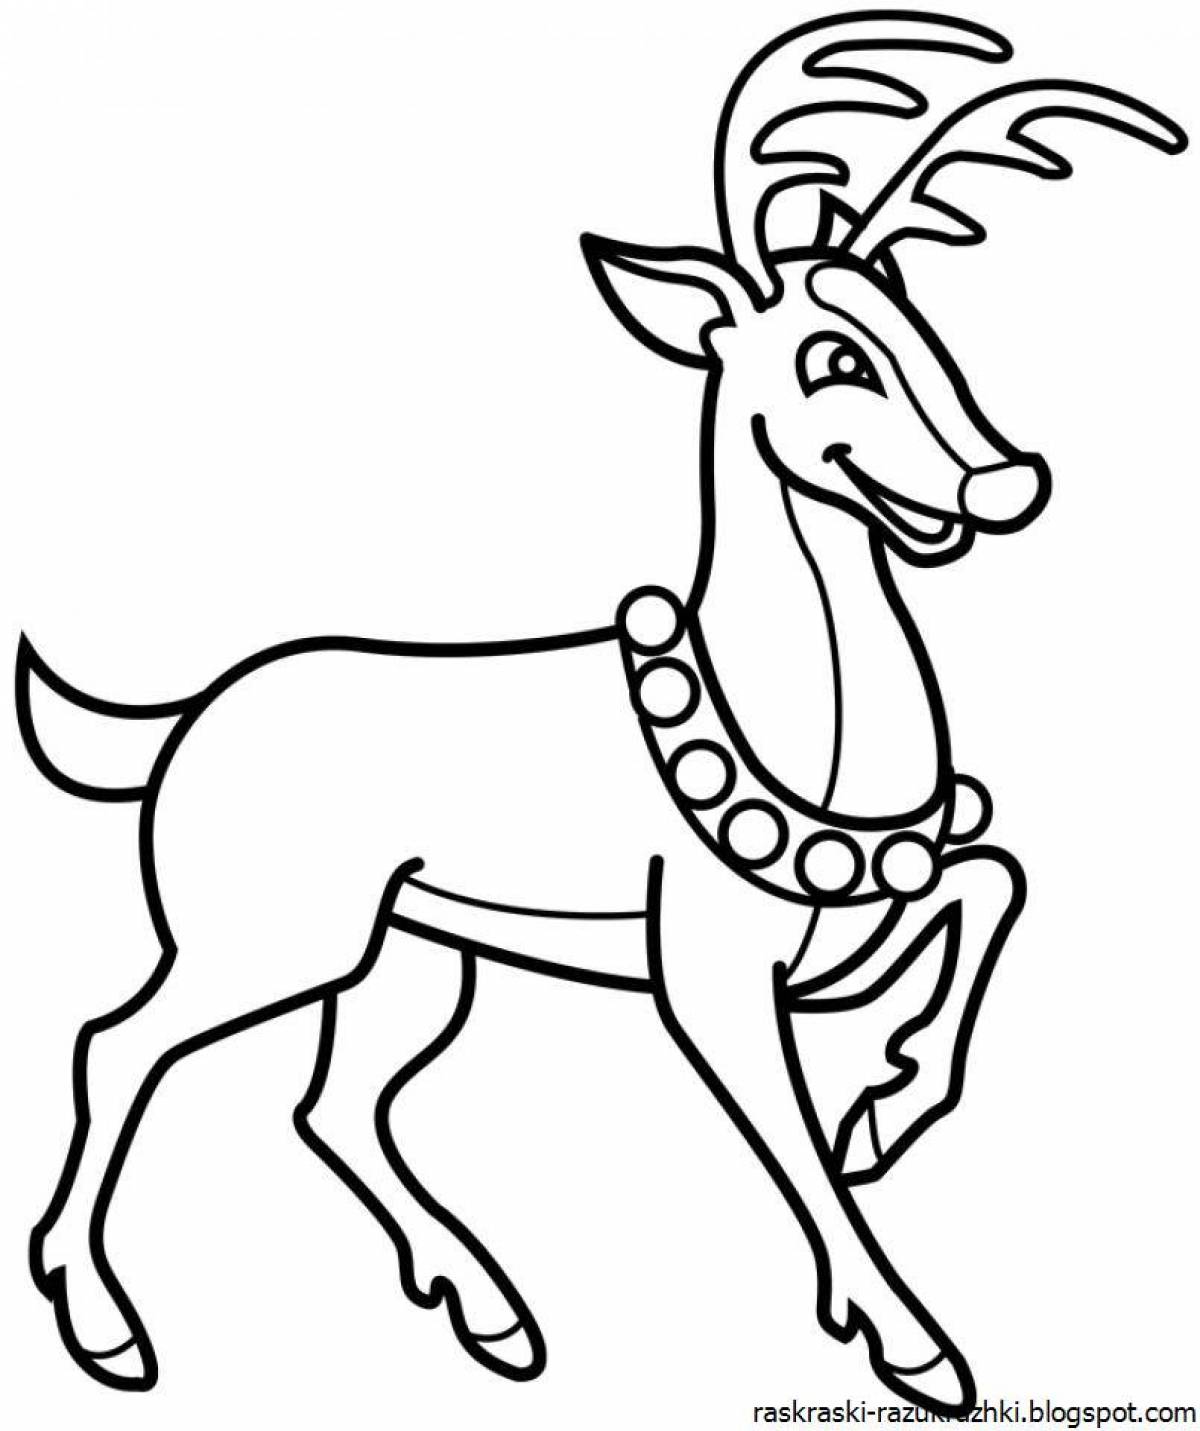 Awesome deer coloring pages for kids